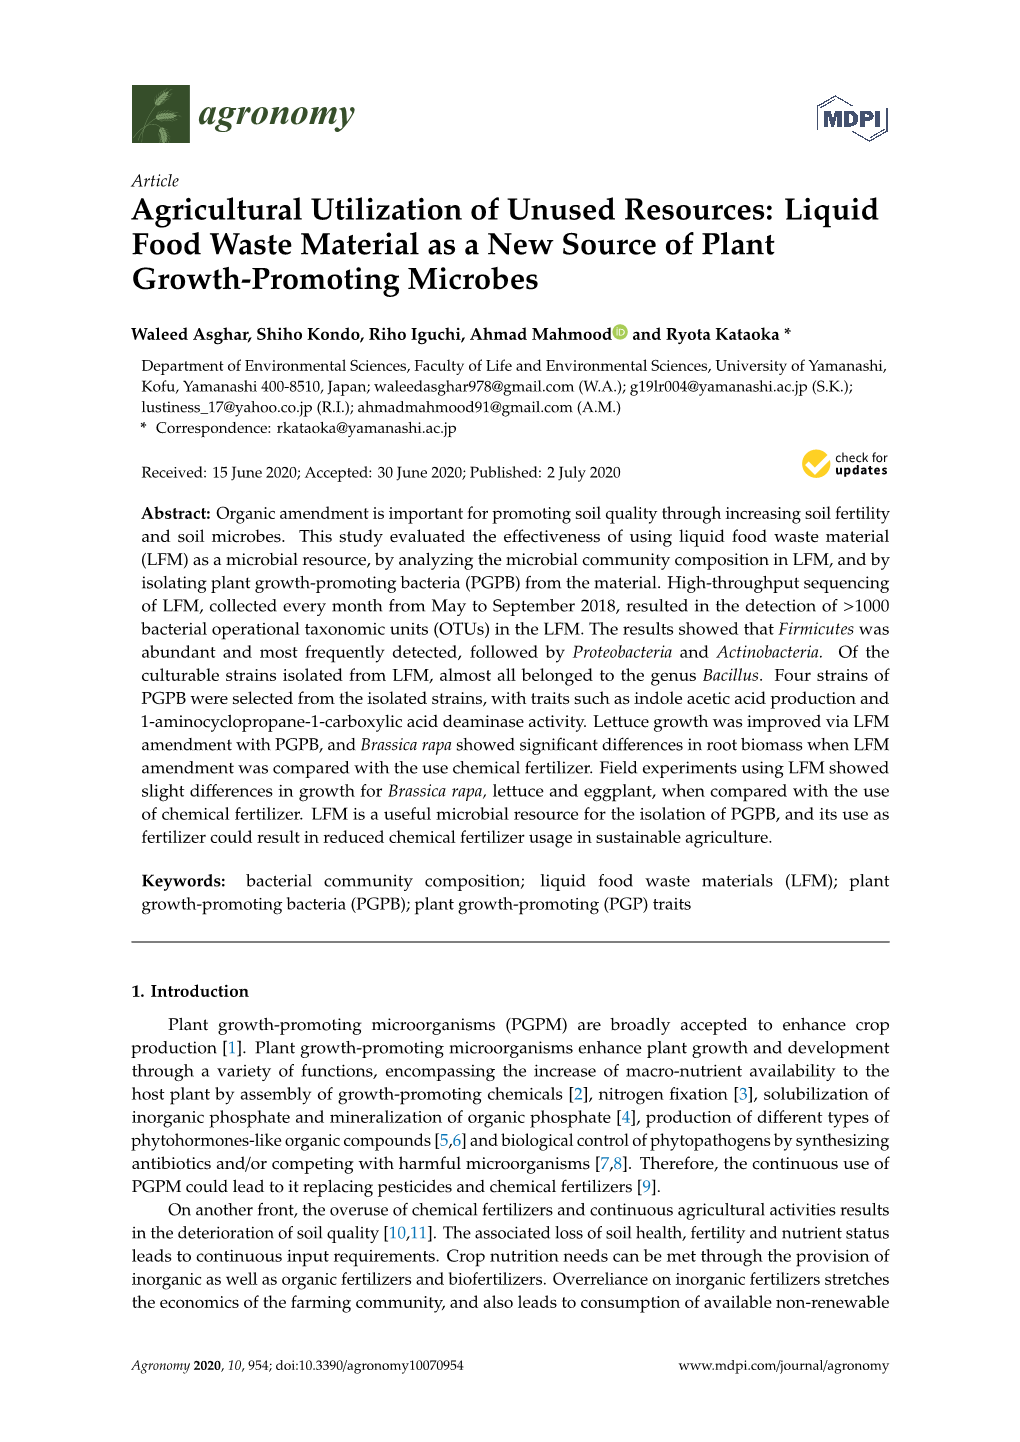 Liquid Food Waste Material As a New Source of Plant Growth-Promoting Microbes